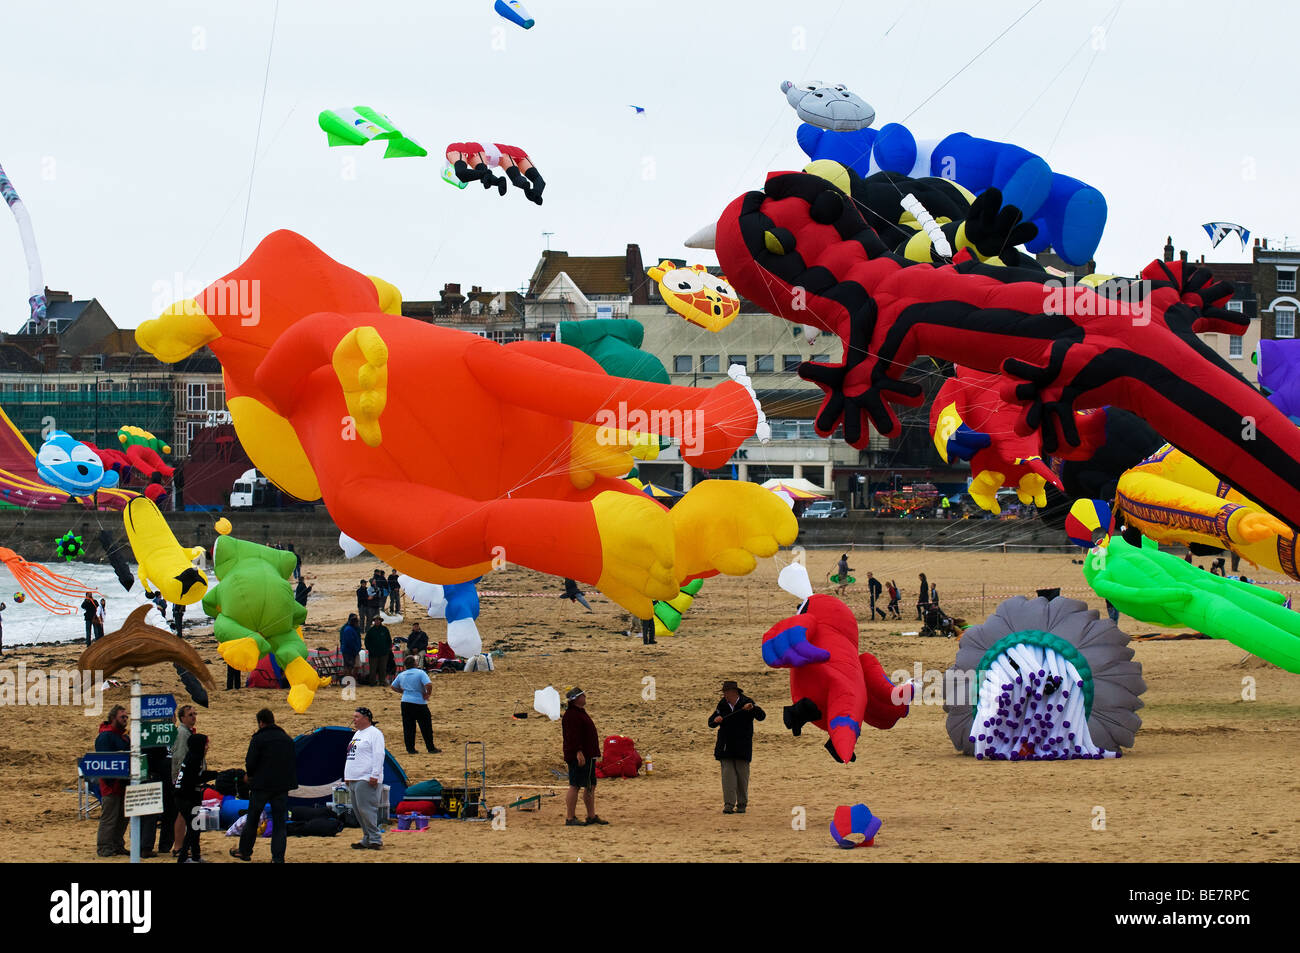 A kite festival on the beach at Margate in Kent. Stock Photo